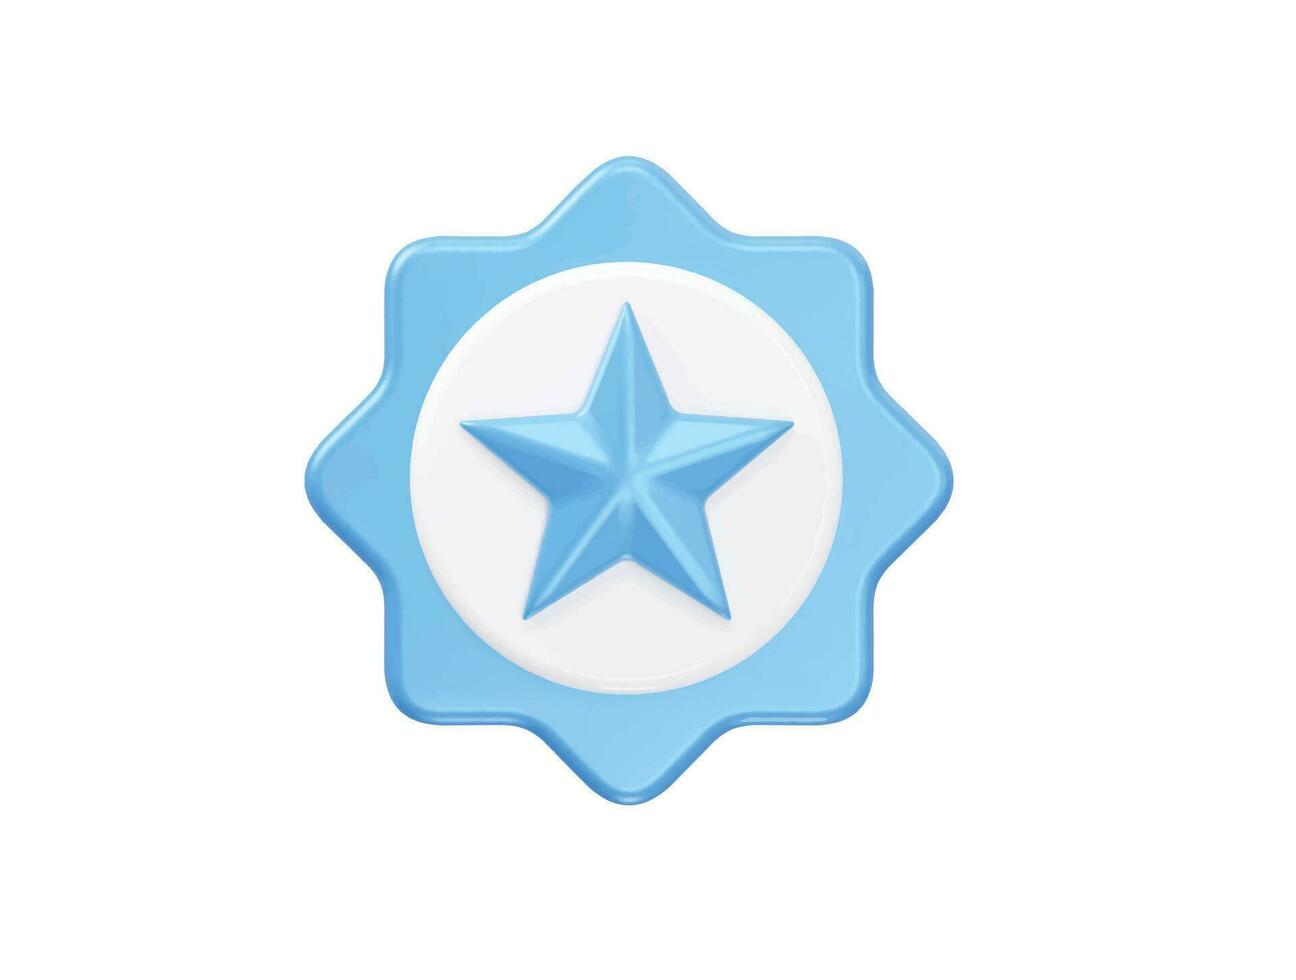 Star  rating icon 3d vector illustration